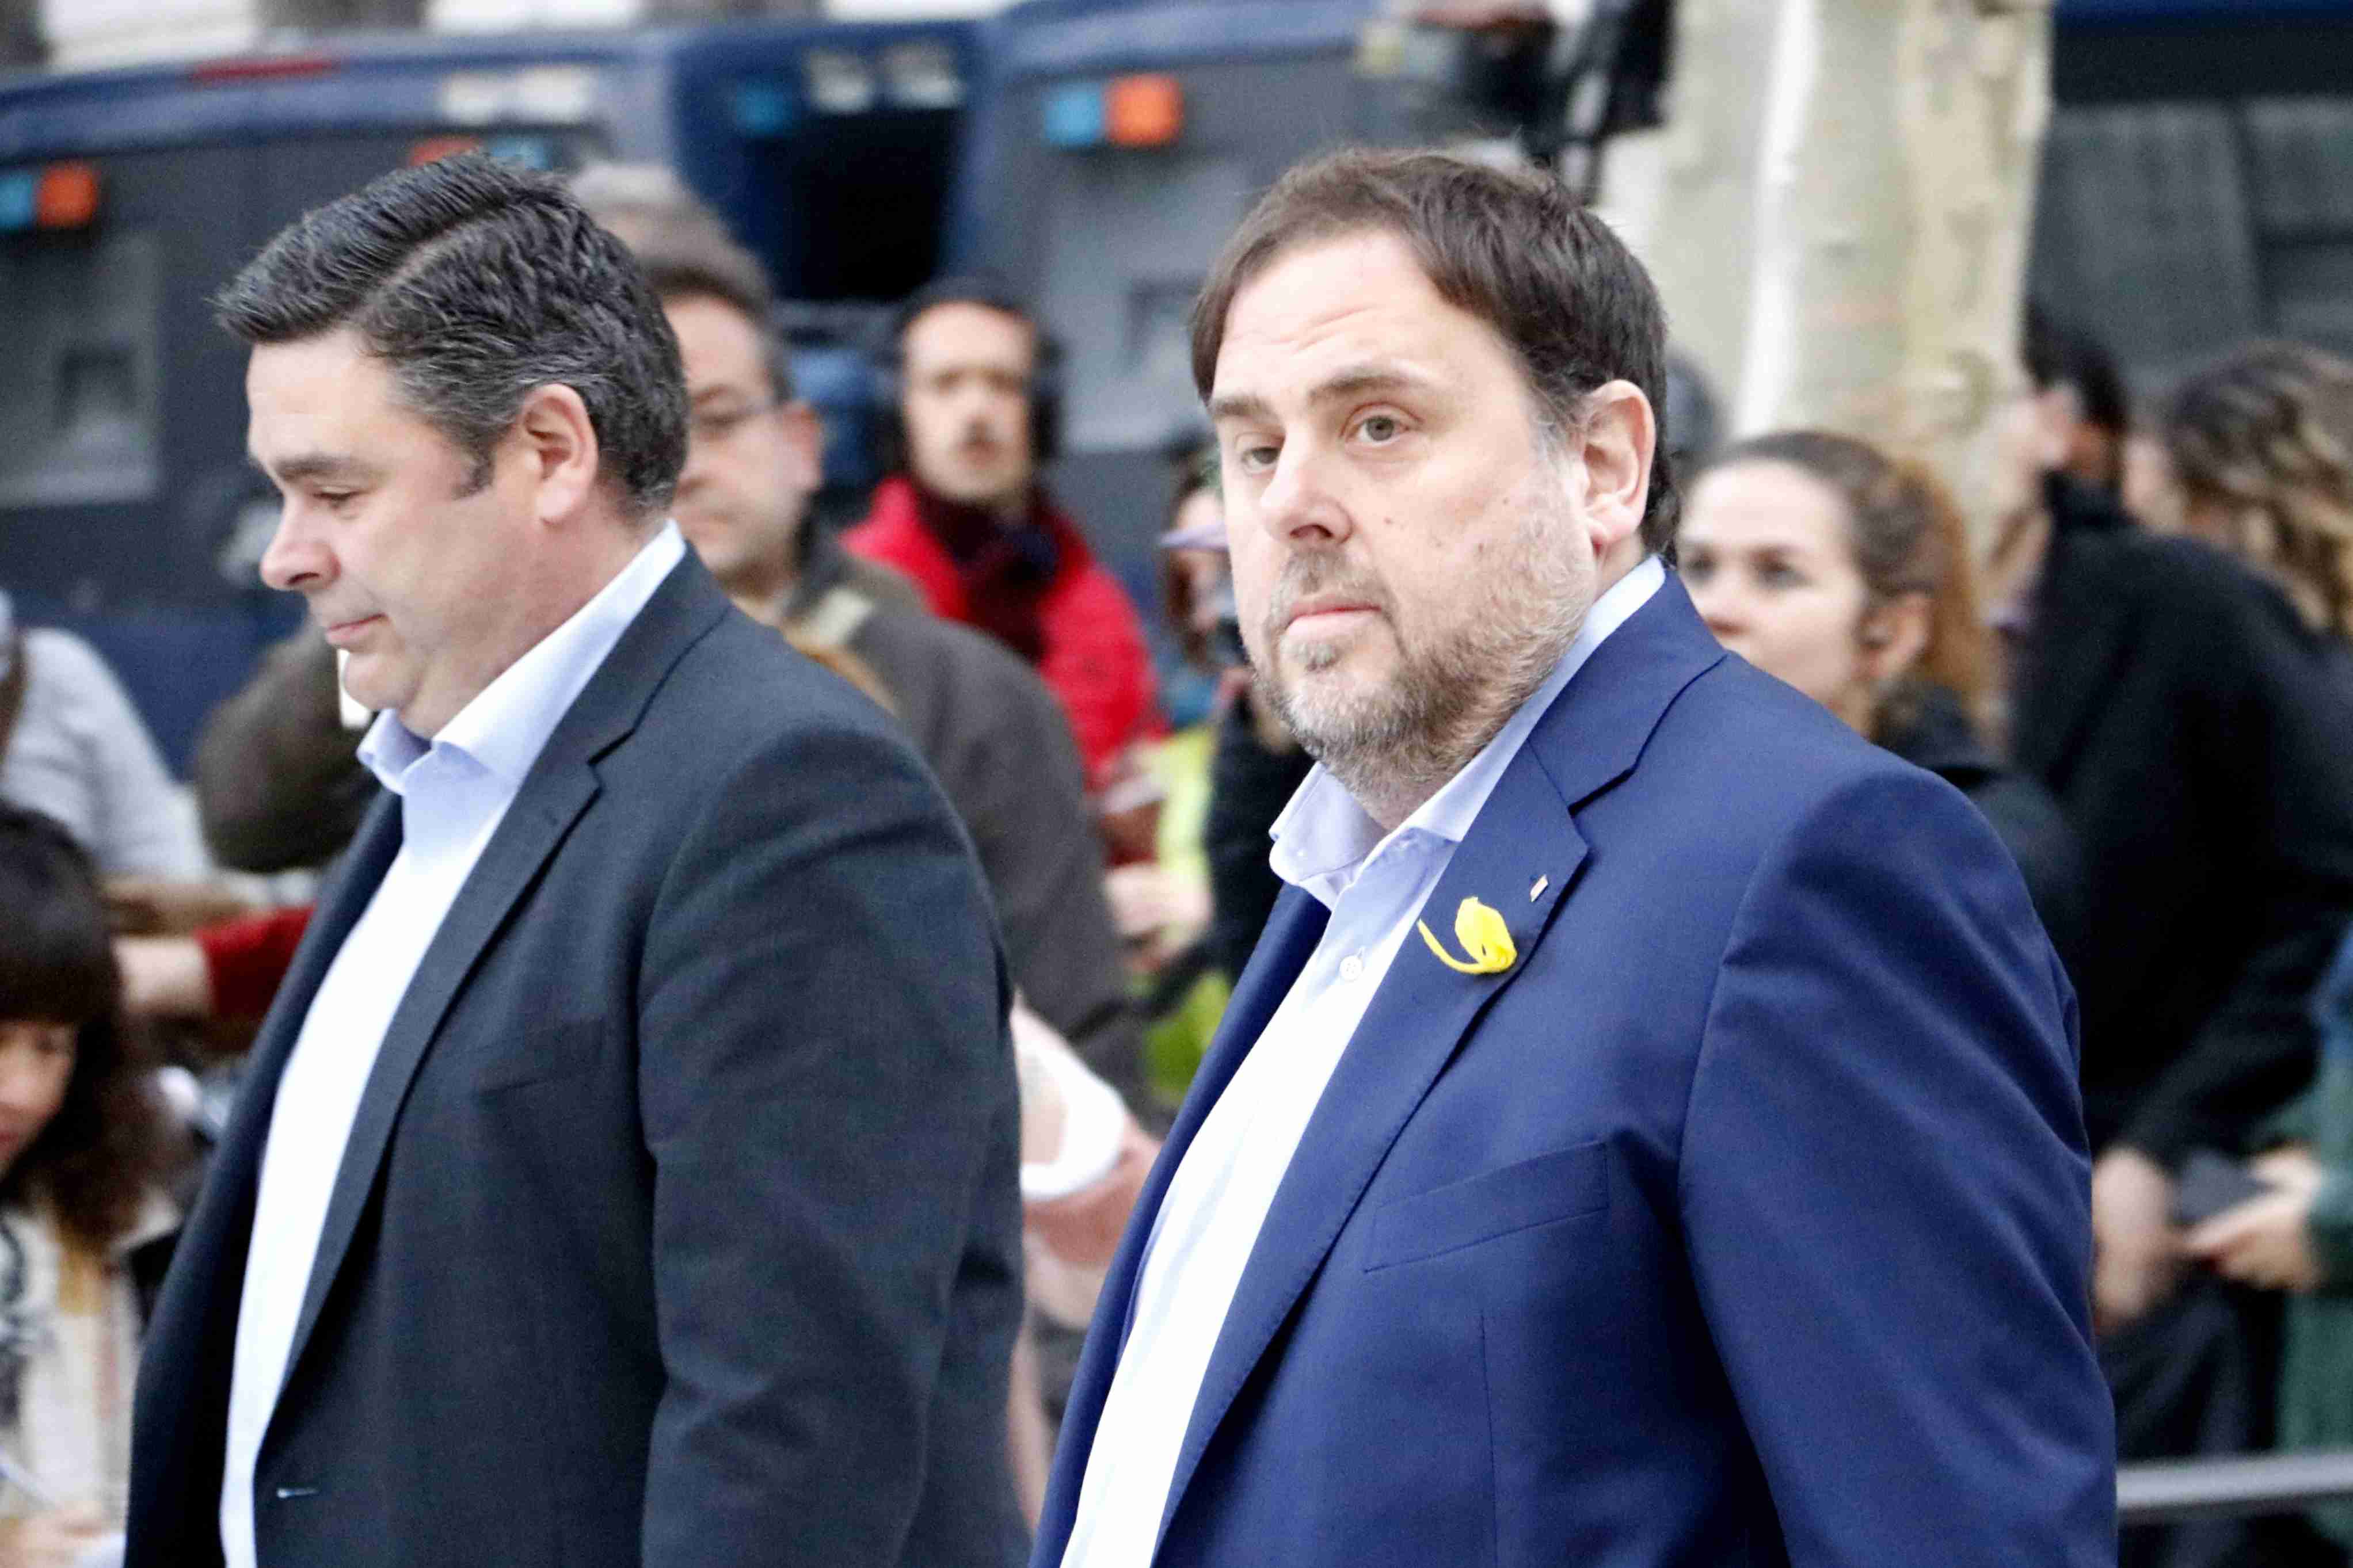 Junqueras' message from prison: "We will never give up on freedom"